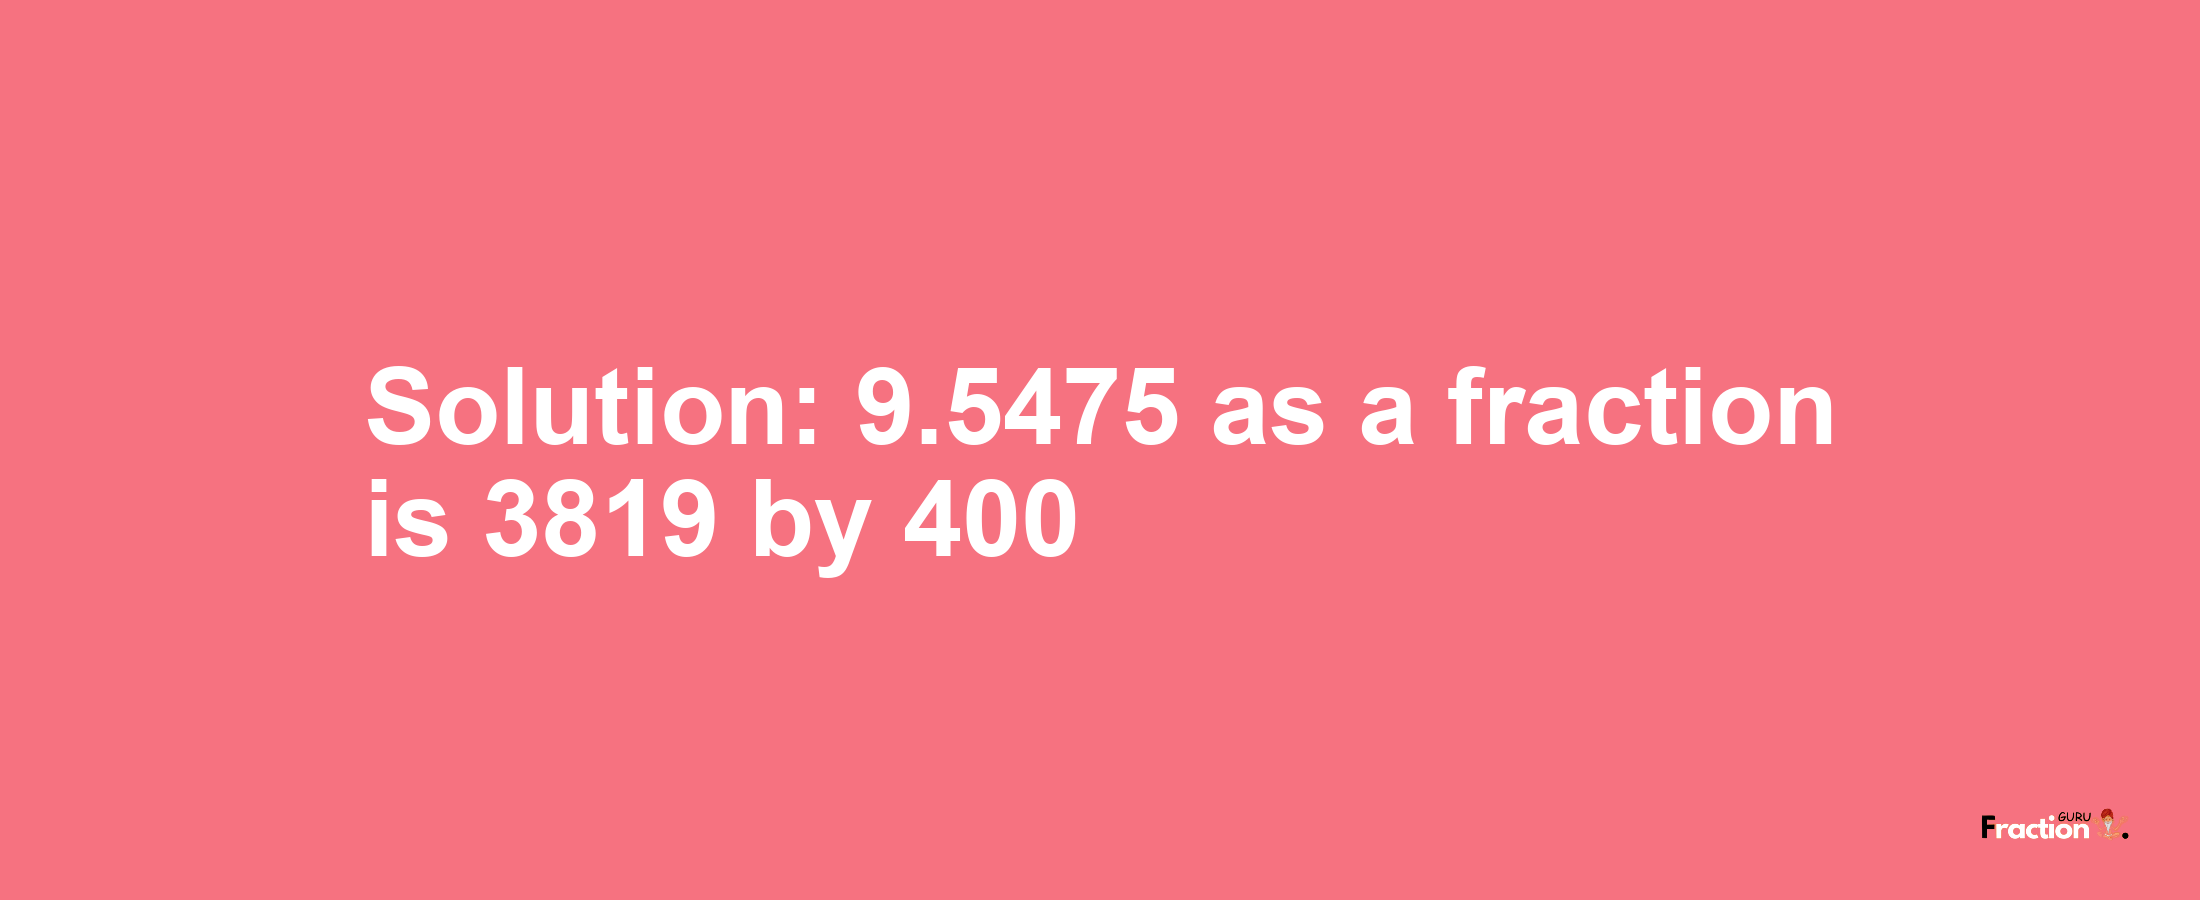 Solution:9.5475 as a fraction is 3819/400